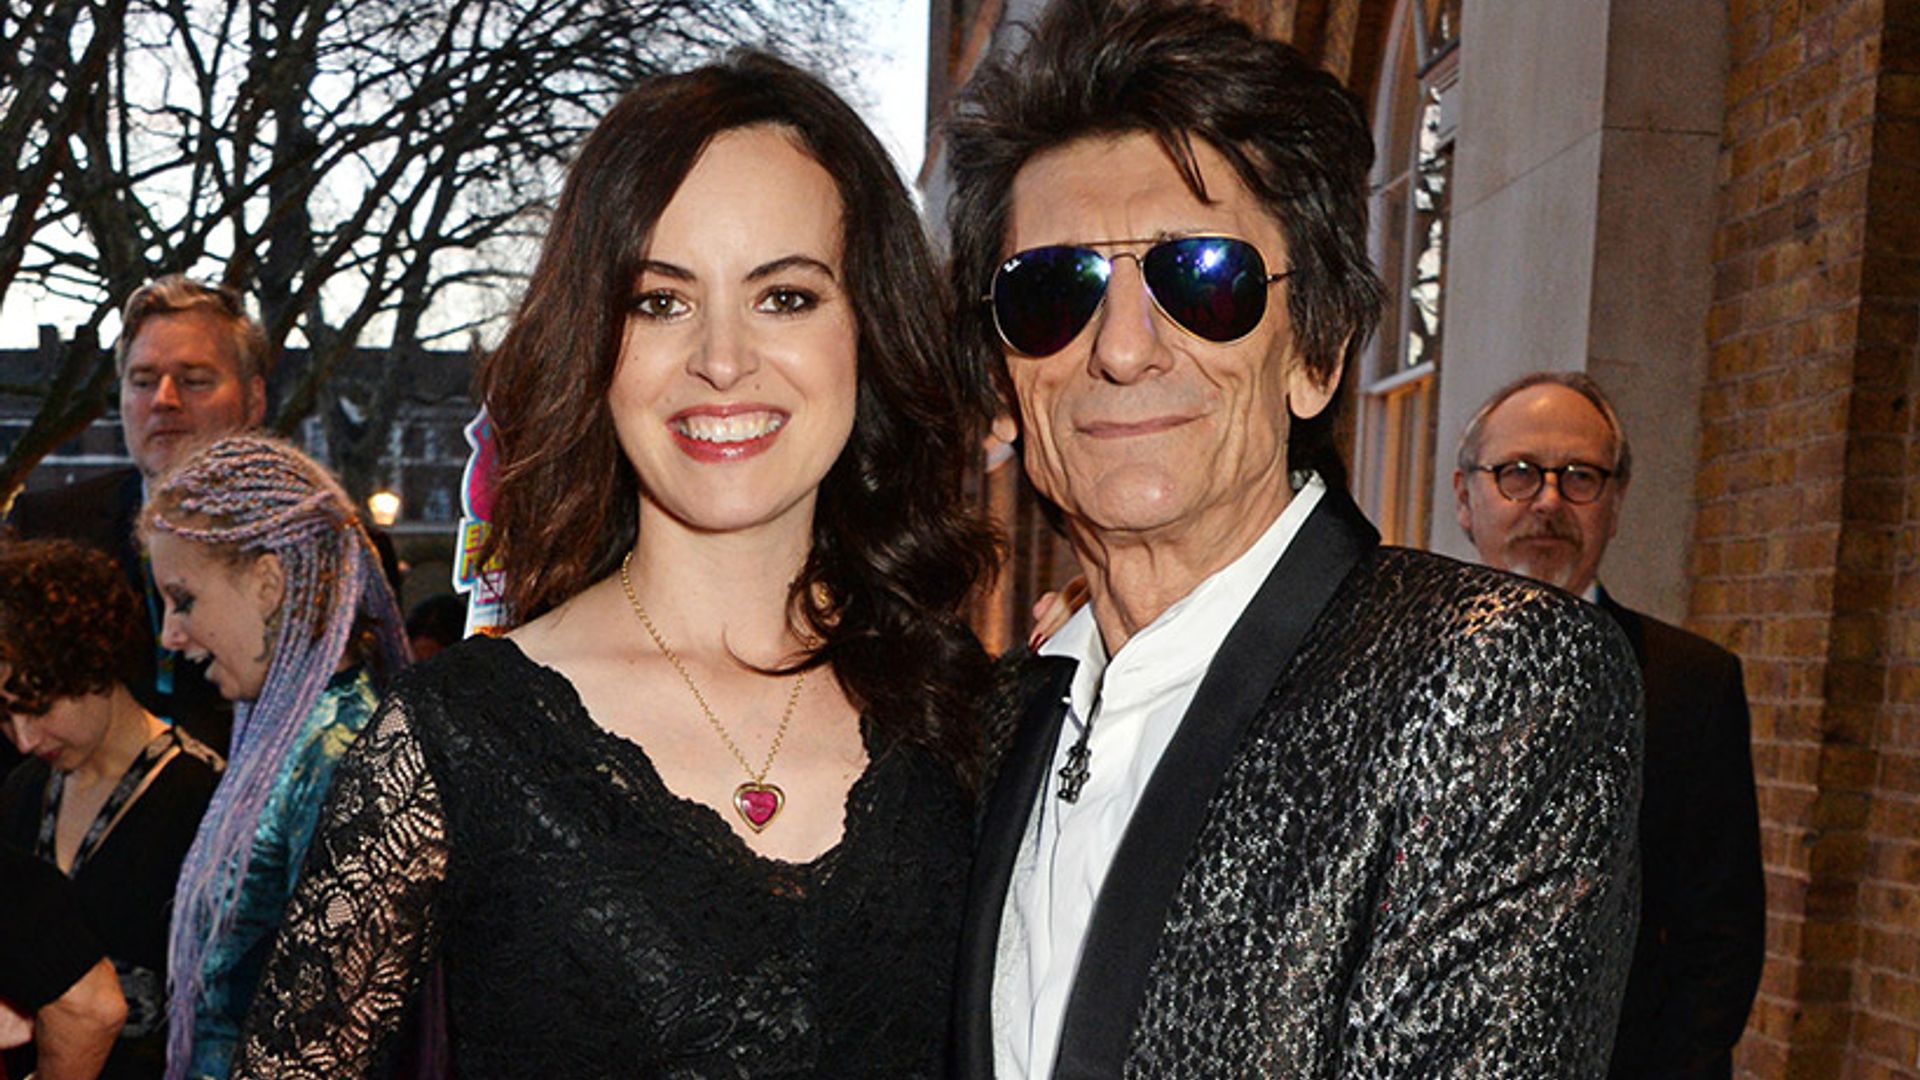 Ronnie Wood opens up about his newborn twin daughters